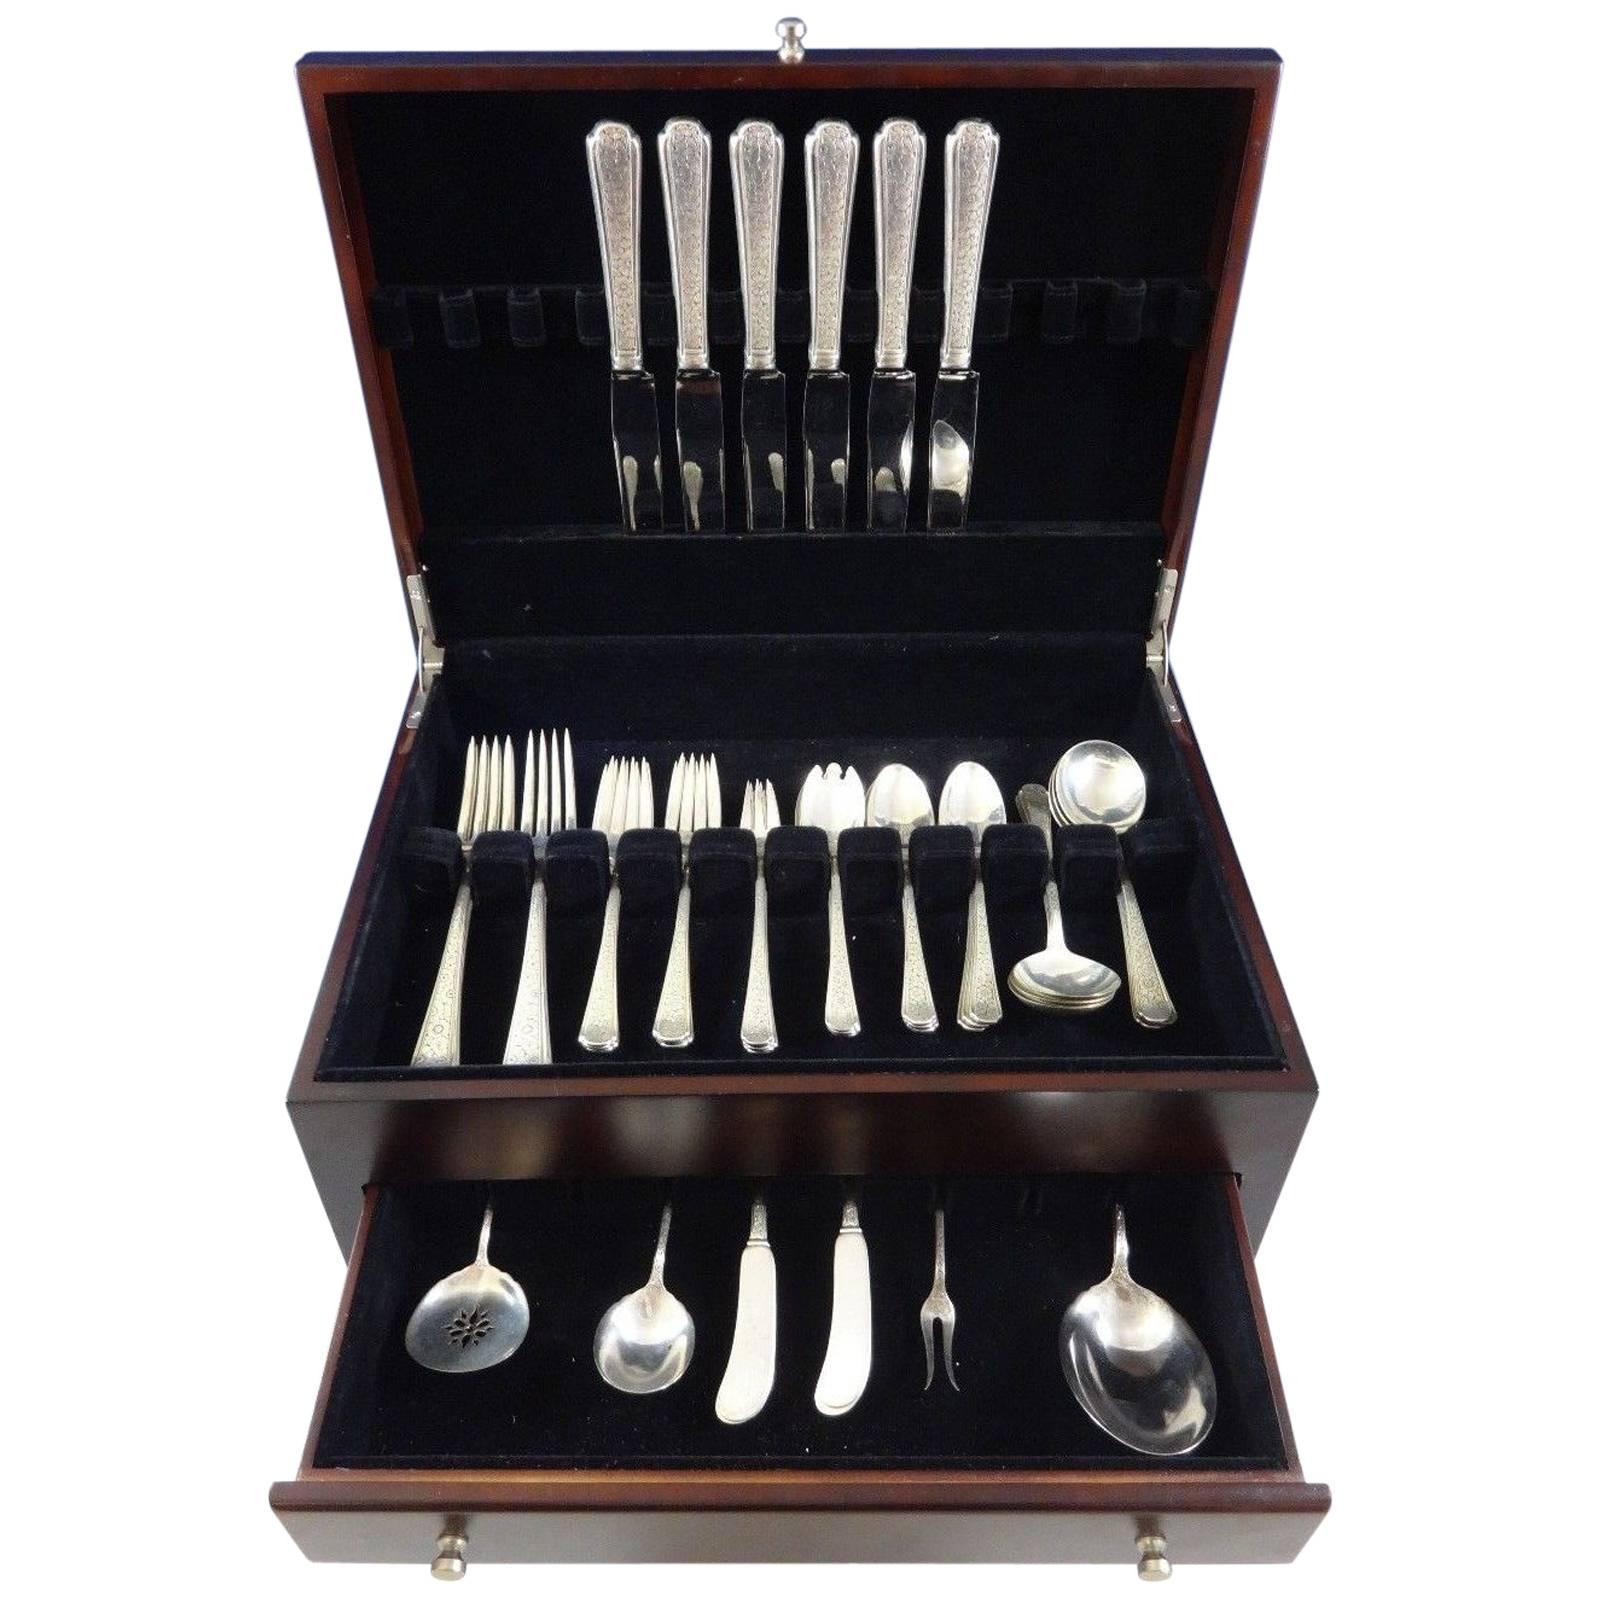 Old Brocade by Towle circa 1932 sterling silver dinner size flatware set, 52 pieces, great starter set! This set includes:

Six dinner size knives, 9 3/4